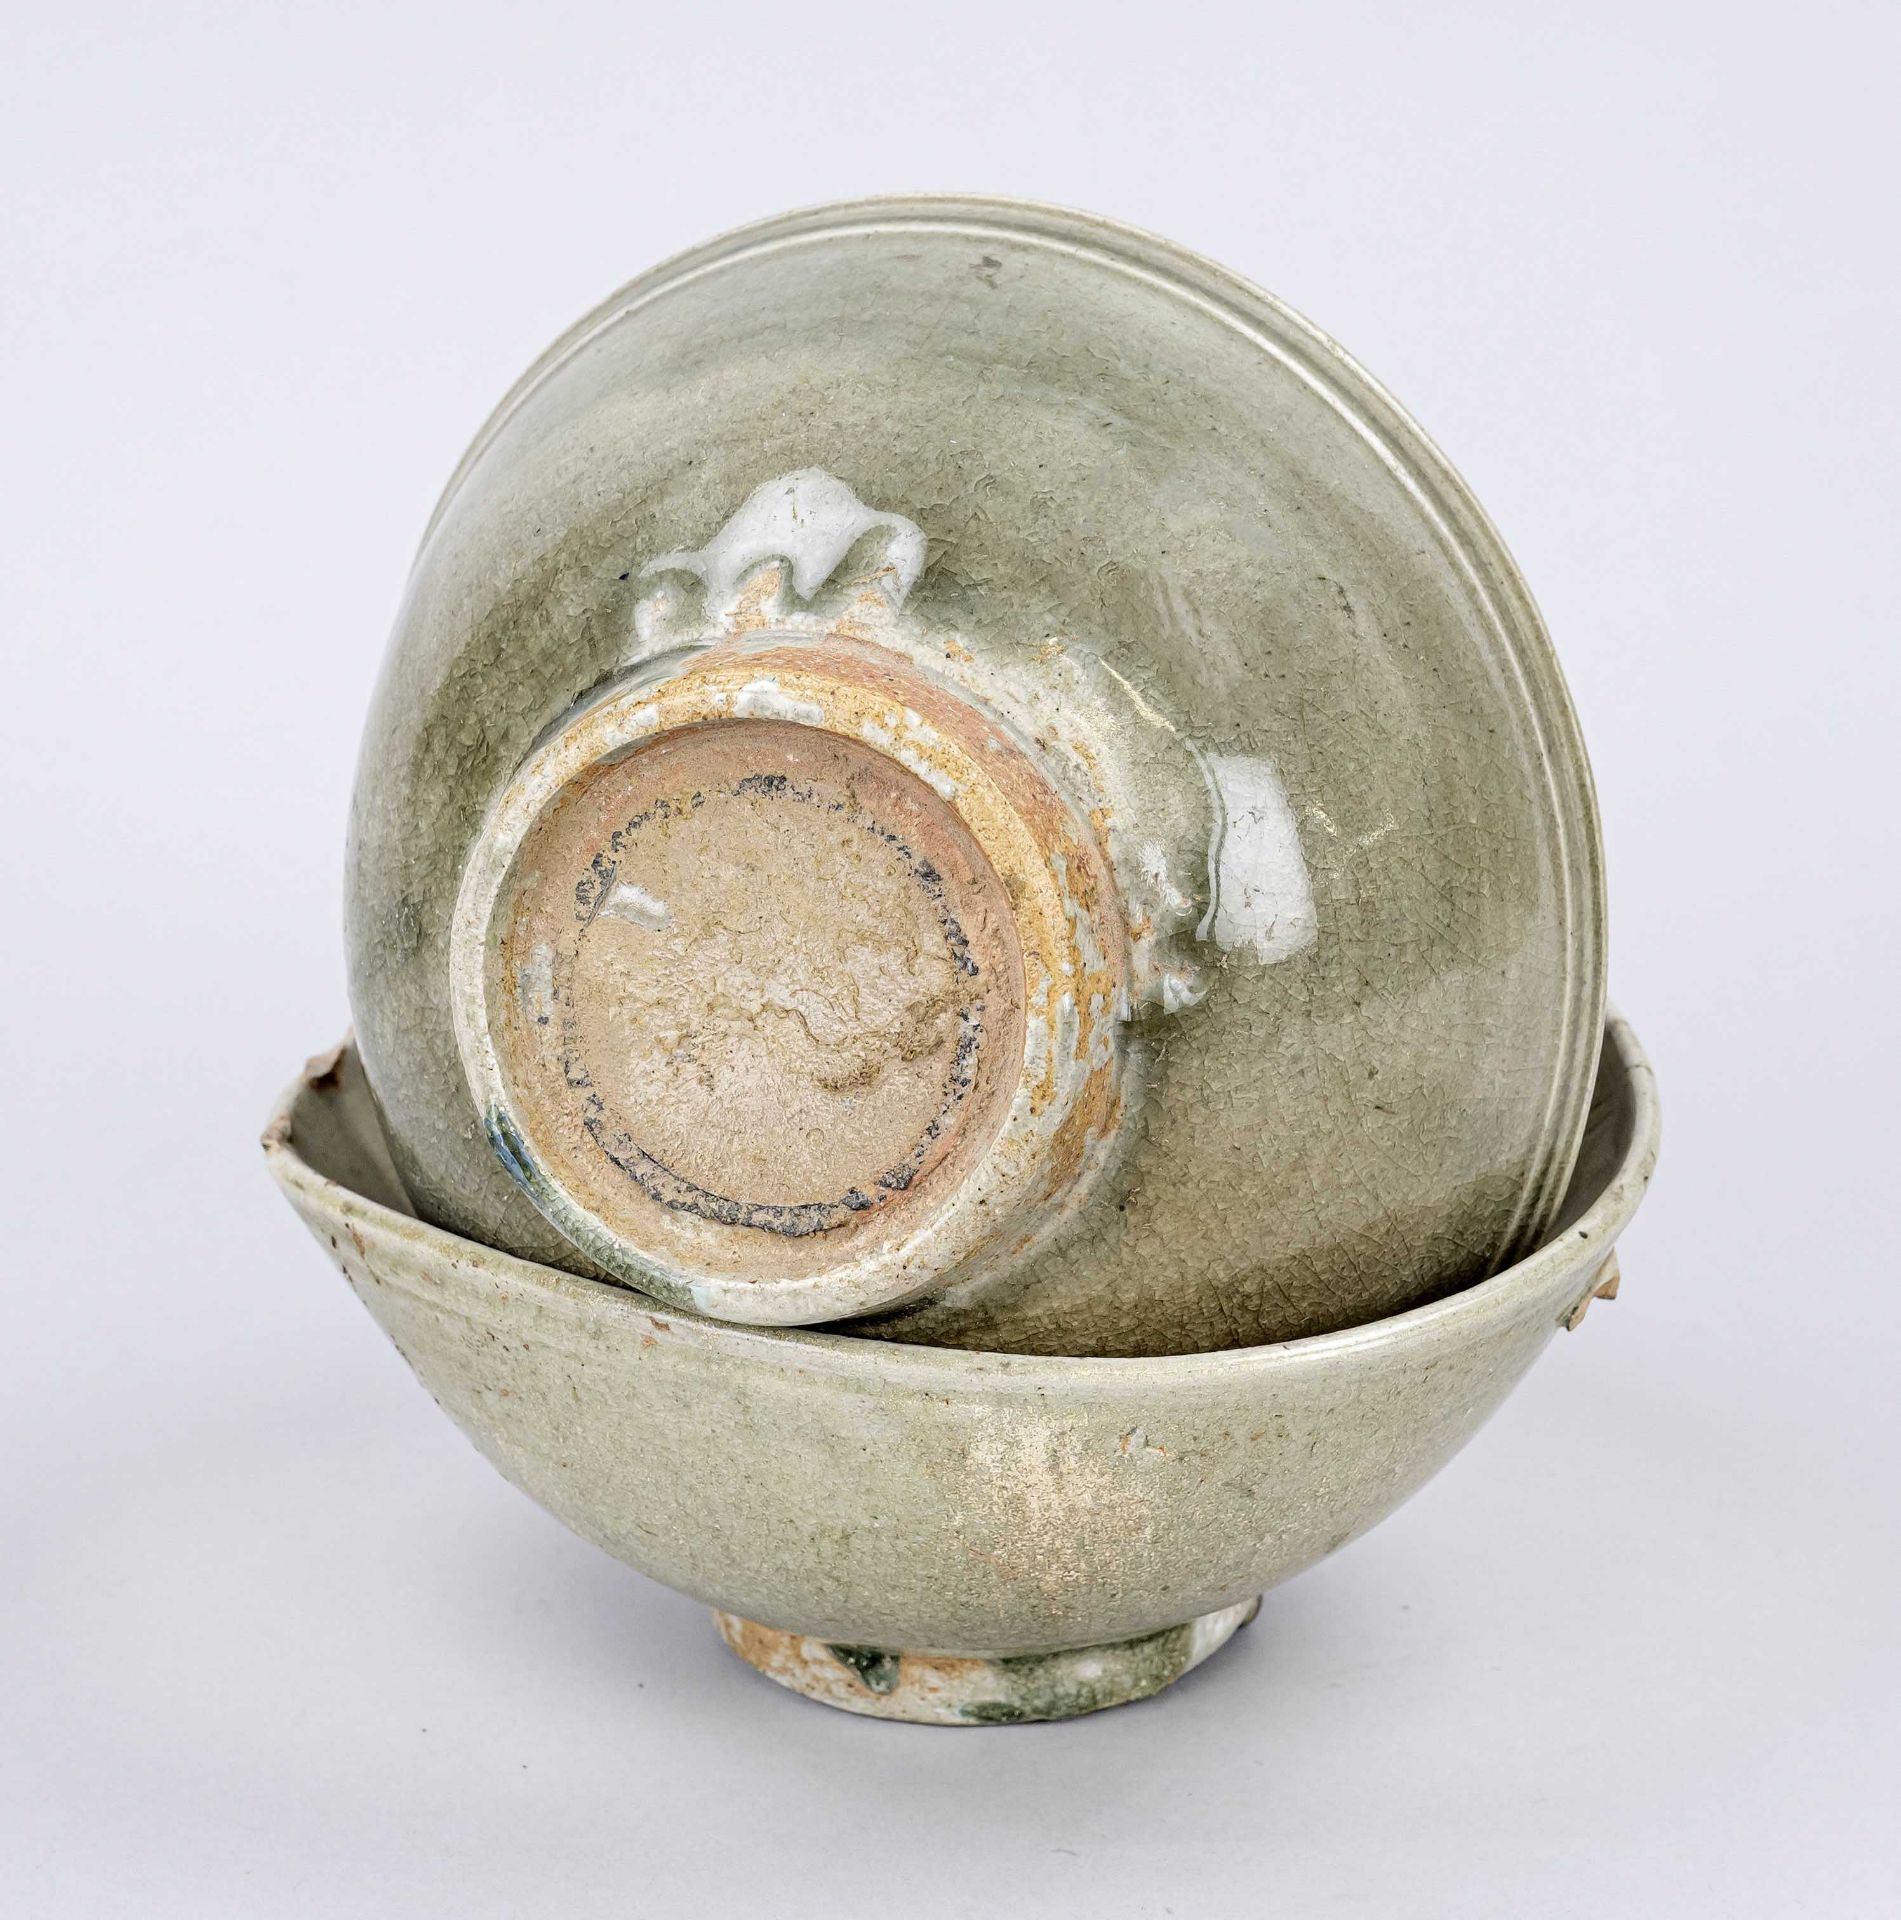 3 Longquan celadon bowls (kiln washers), China, probably Song period. H. 23 cm - Image 2 of 2